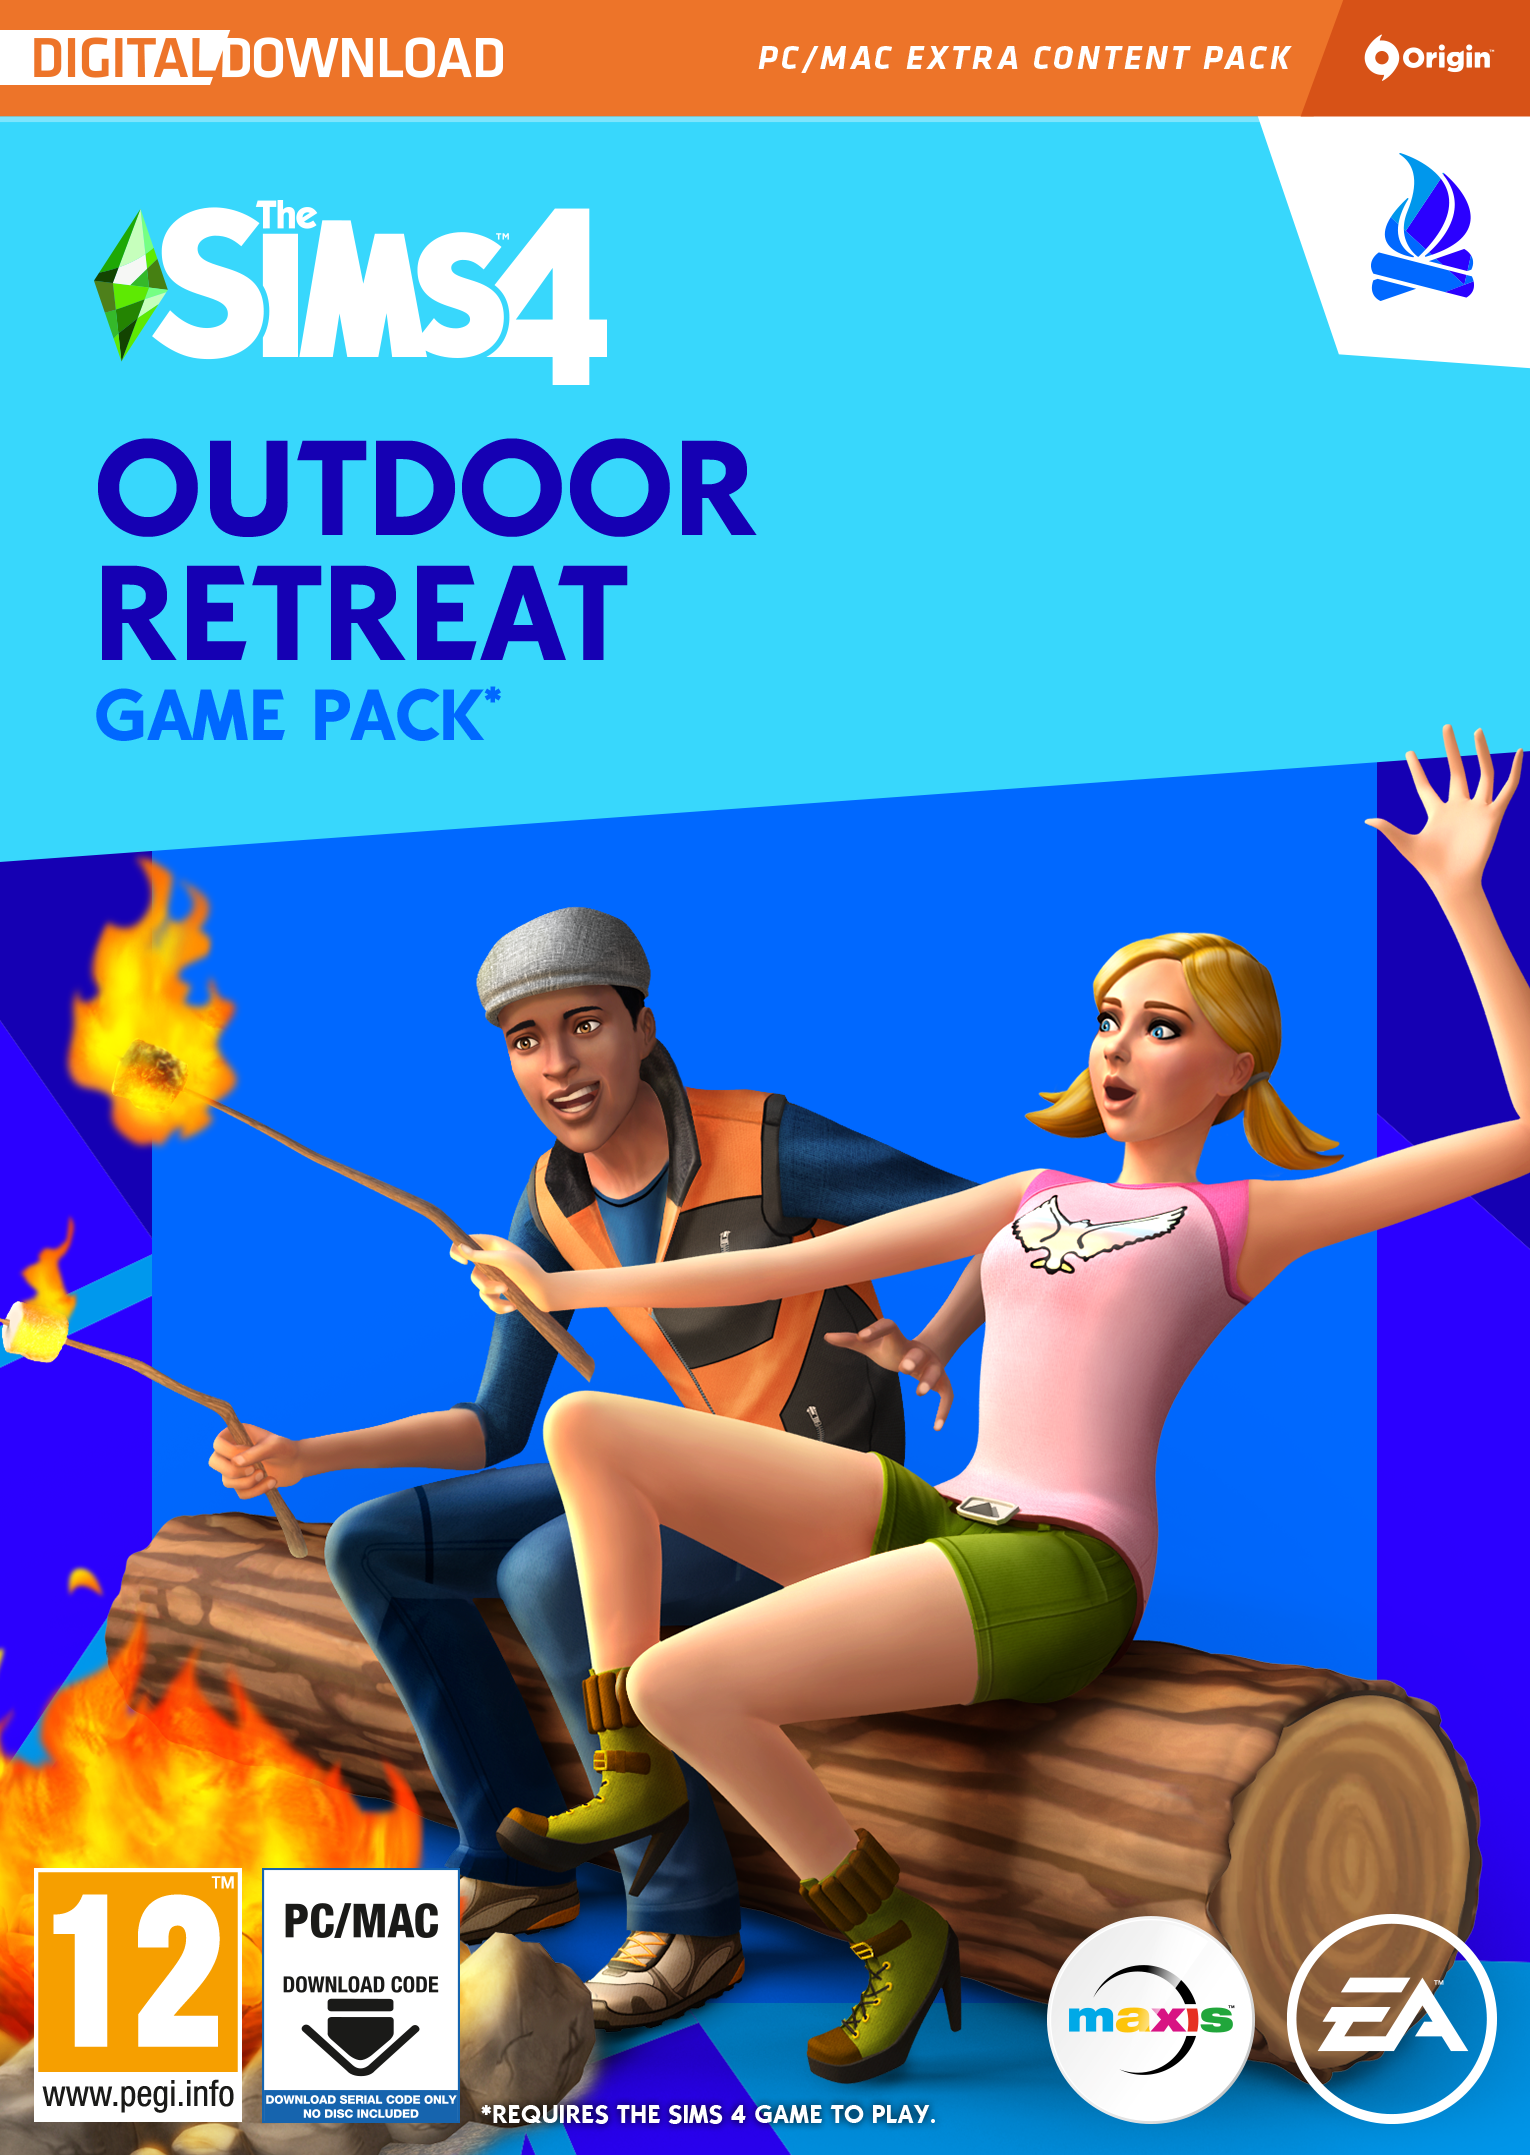 THE SIMS 4 OUTDOOR RETREAT